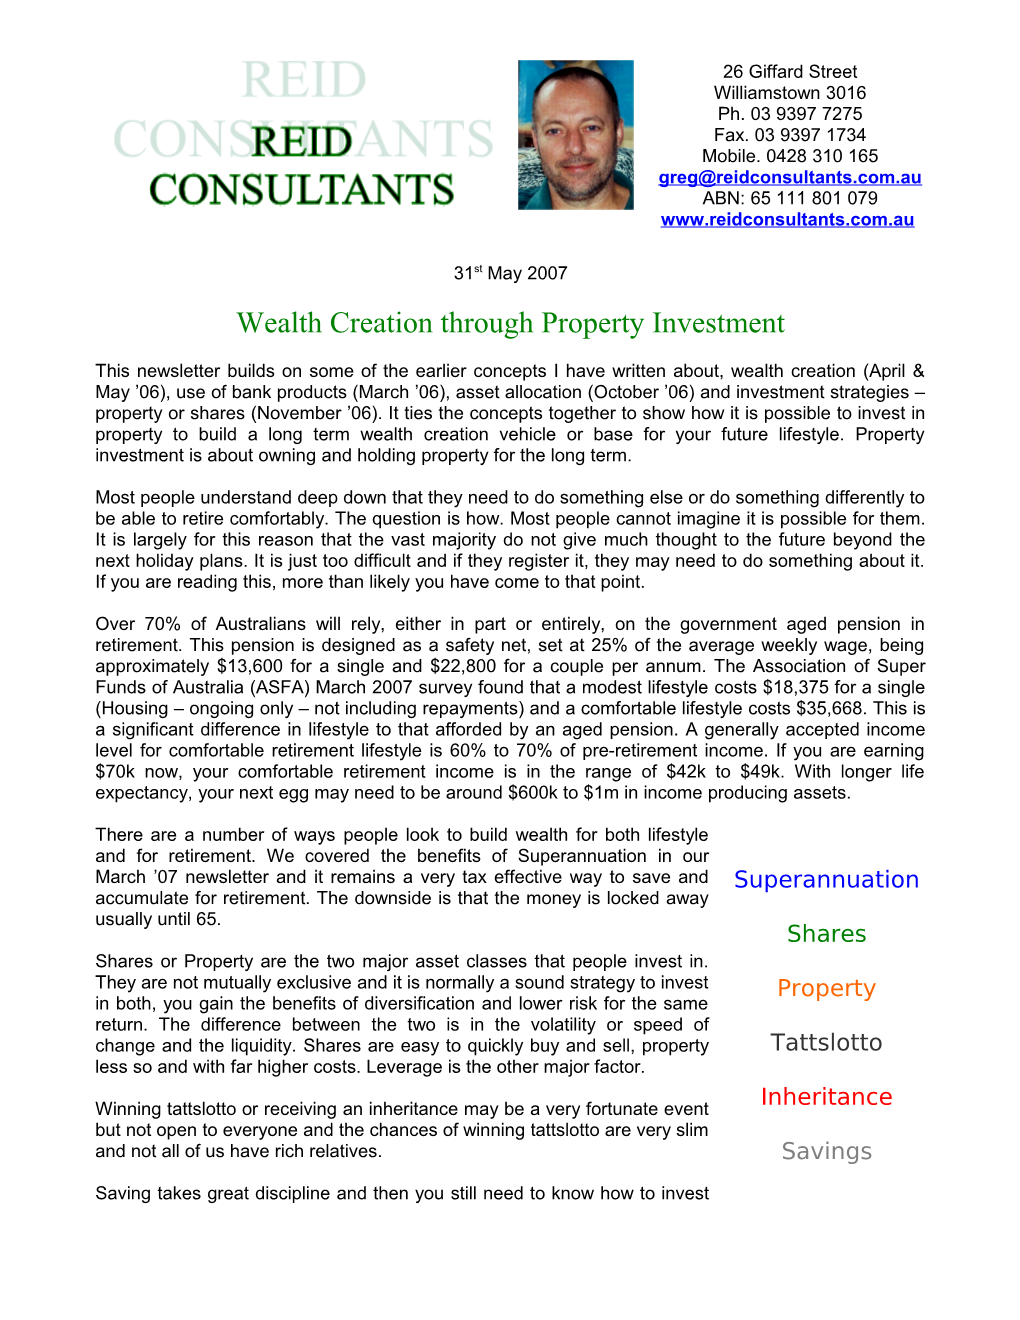 Wealth Creation Through Property Investment